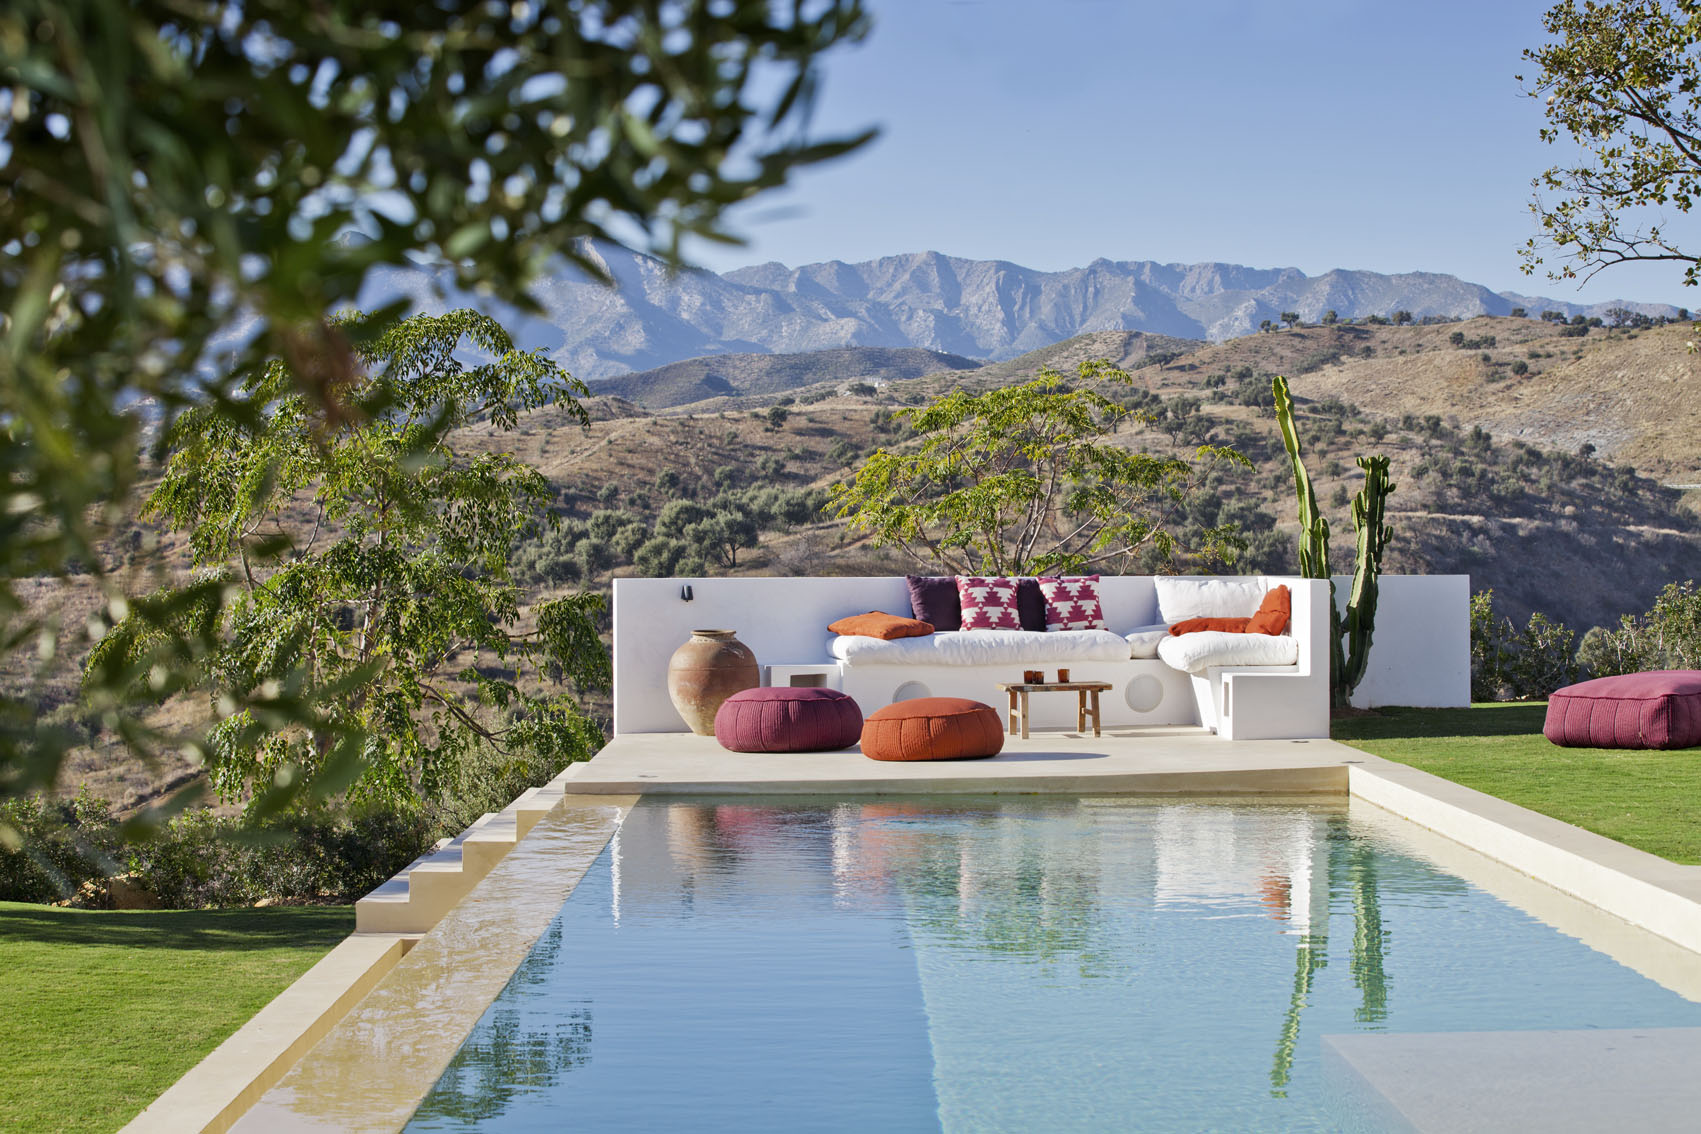 Infinity pool with a Mountain view, Texas, Colorado, Outside lounge, poolside, Marbella, Andalucia, Arizona feel, desert, olive groves, Poofs, Cushions